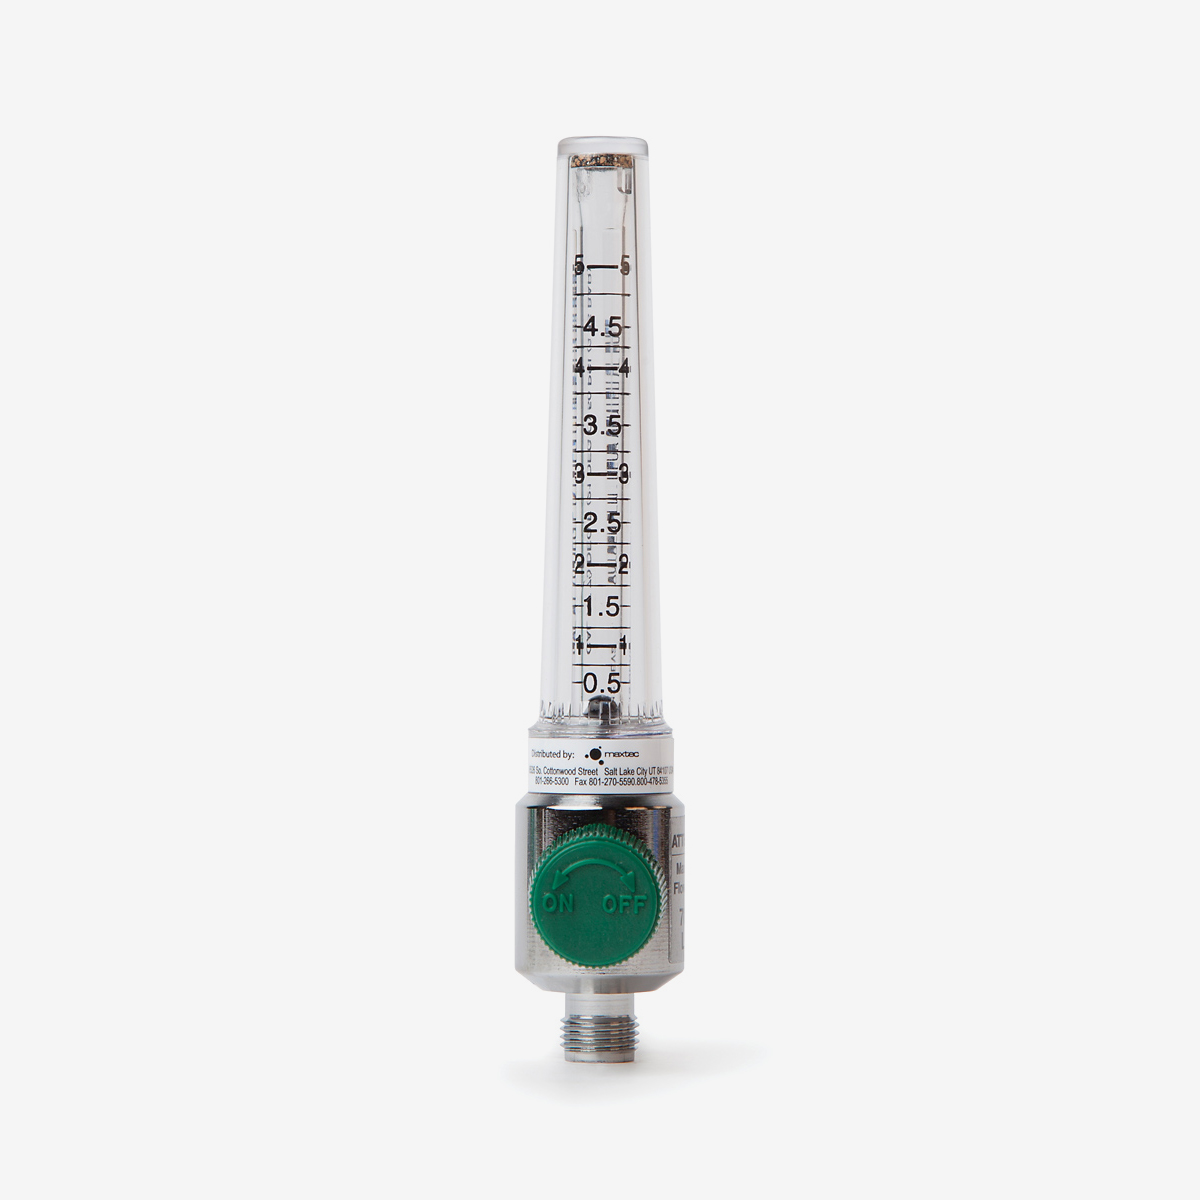 Front view of 0-5 lpm flow meter with green knob